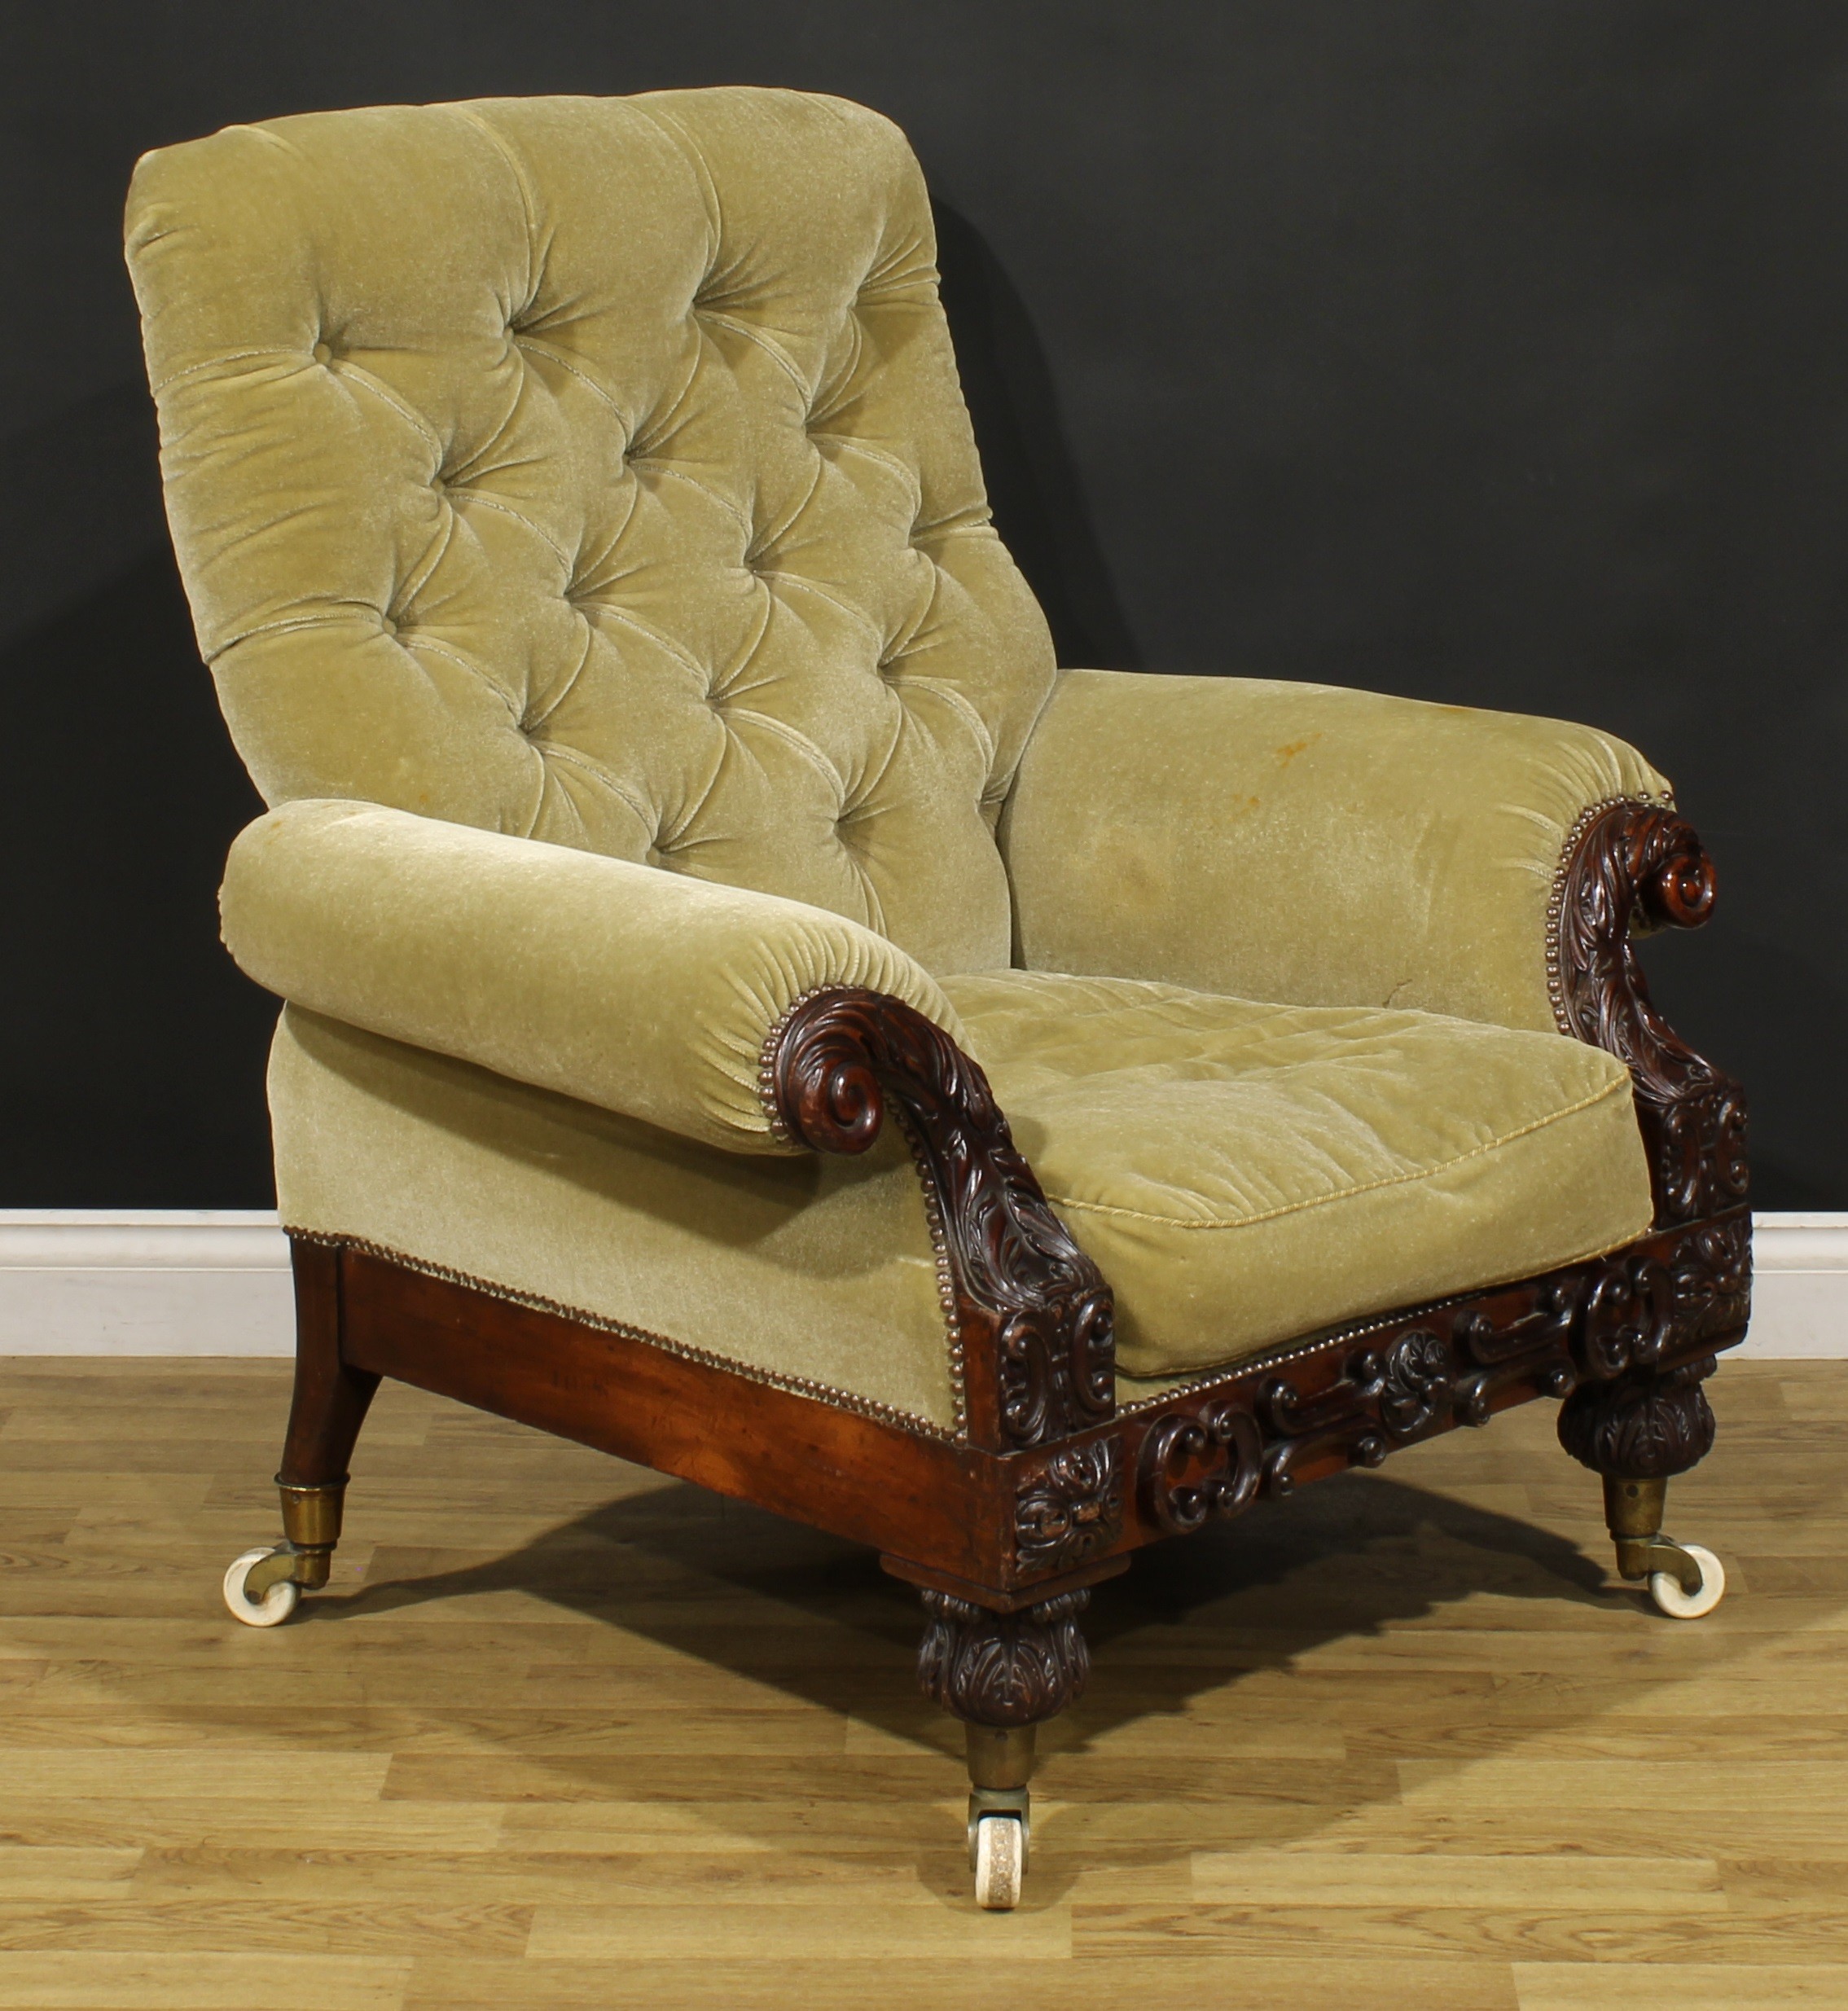 A substantial 19th century mahogany lyre-form library chair, in the manner of Gillows of Lancaster - Image 2 of 4